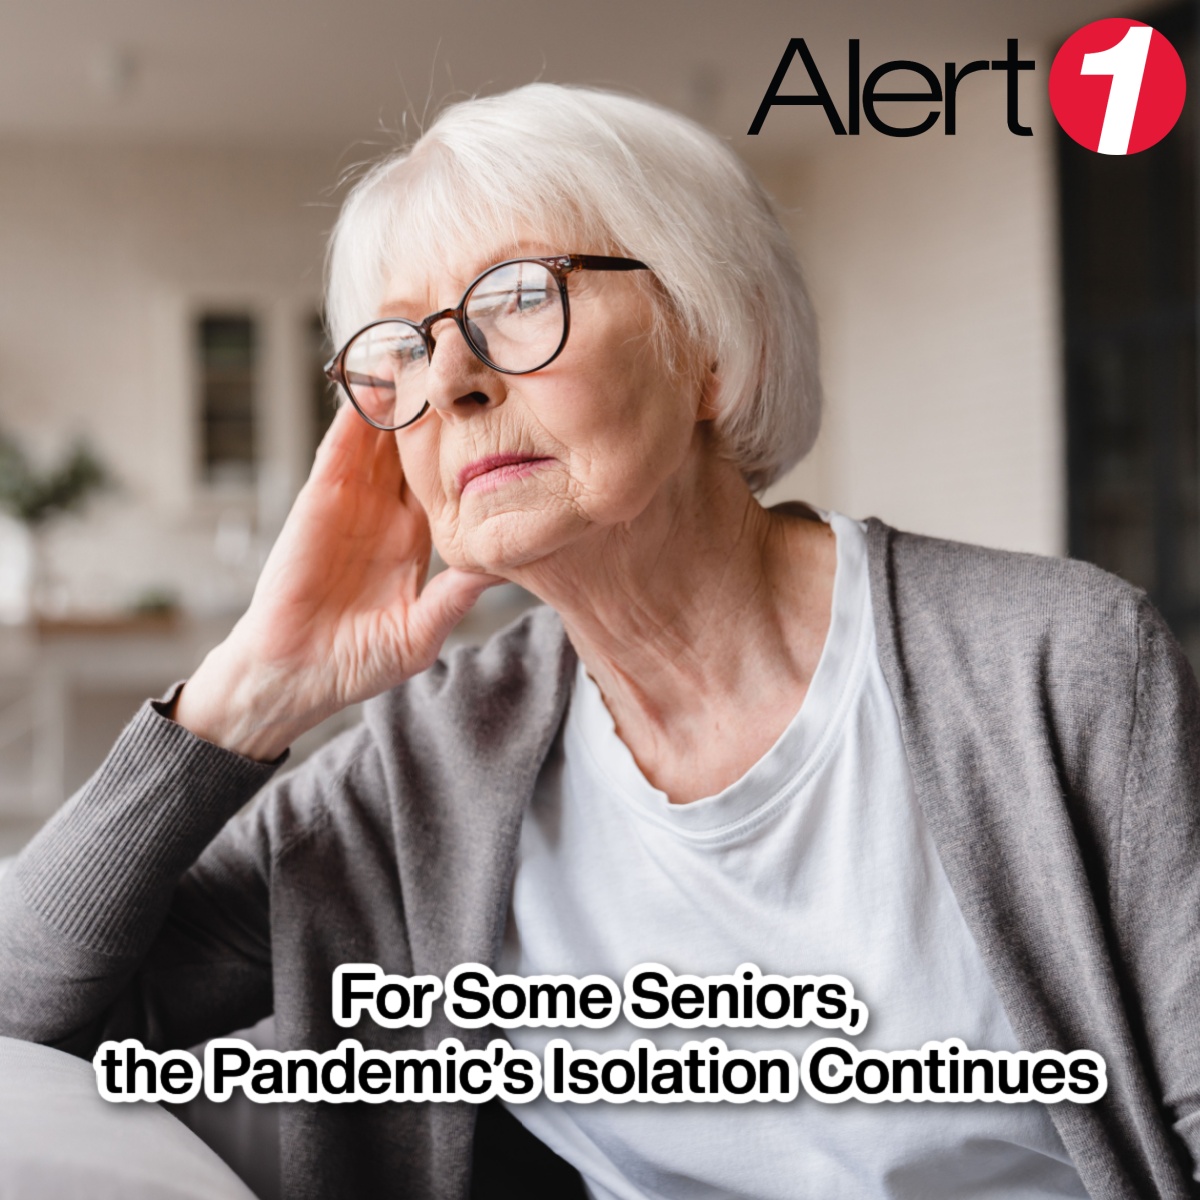 For some #seniors, the pandemic’s #isolation continues. Here’s what you can do about it: bit.ly/3w6hp3n

#tips #seniorhealth #seniorwellness #newnormal